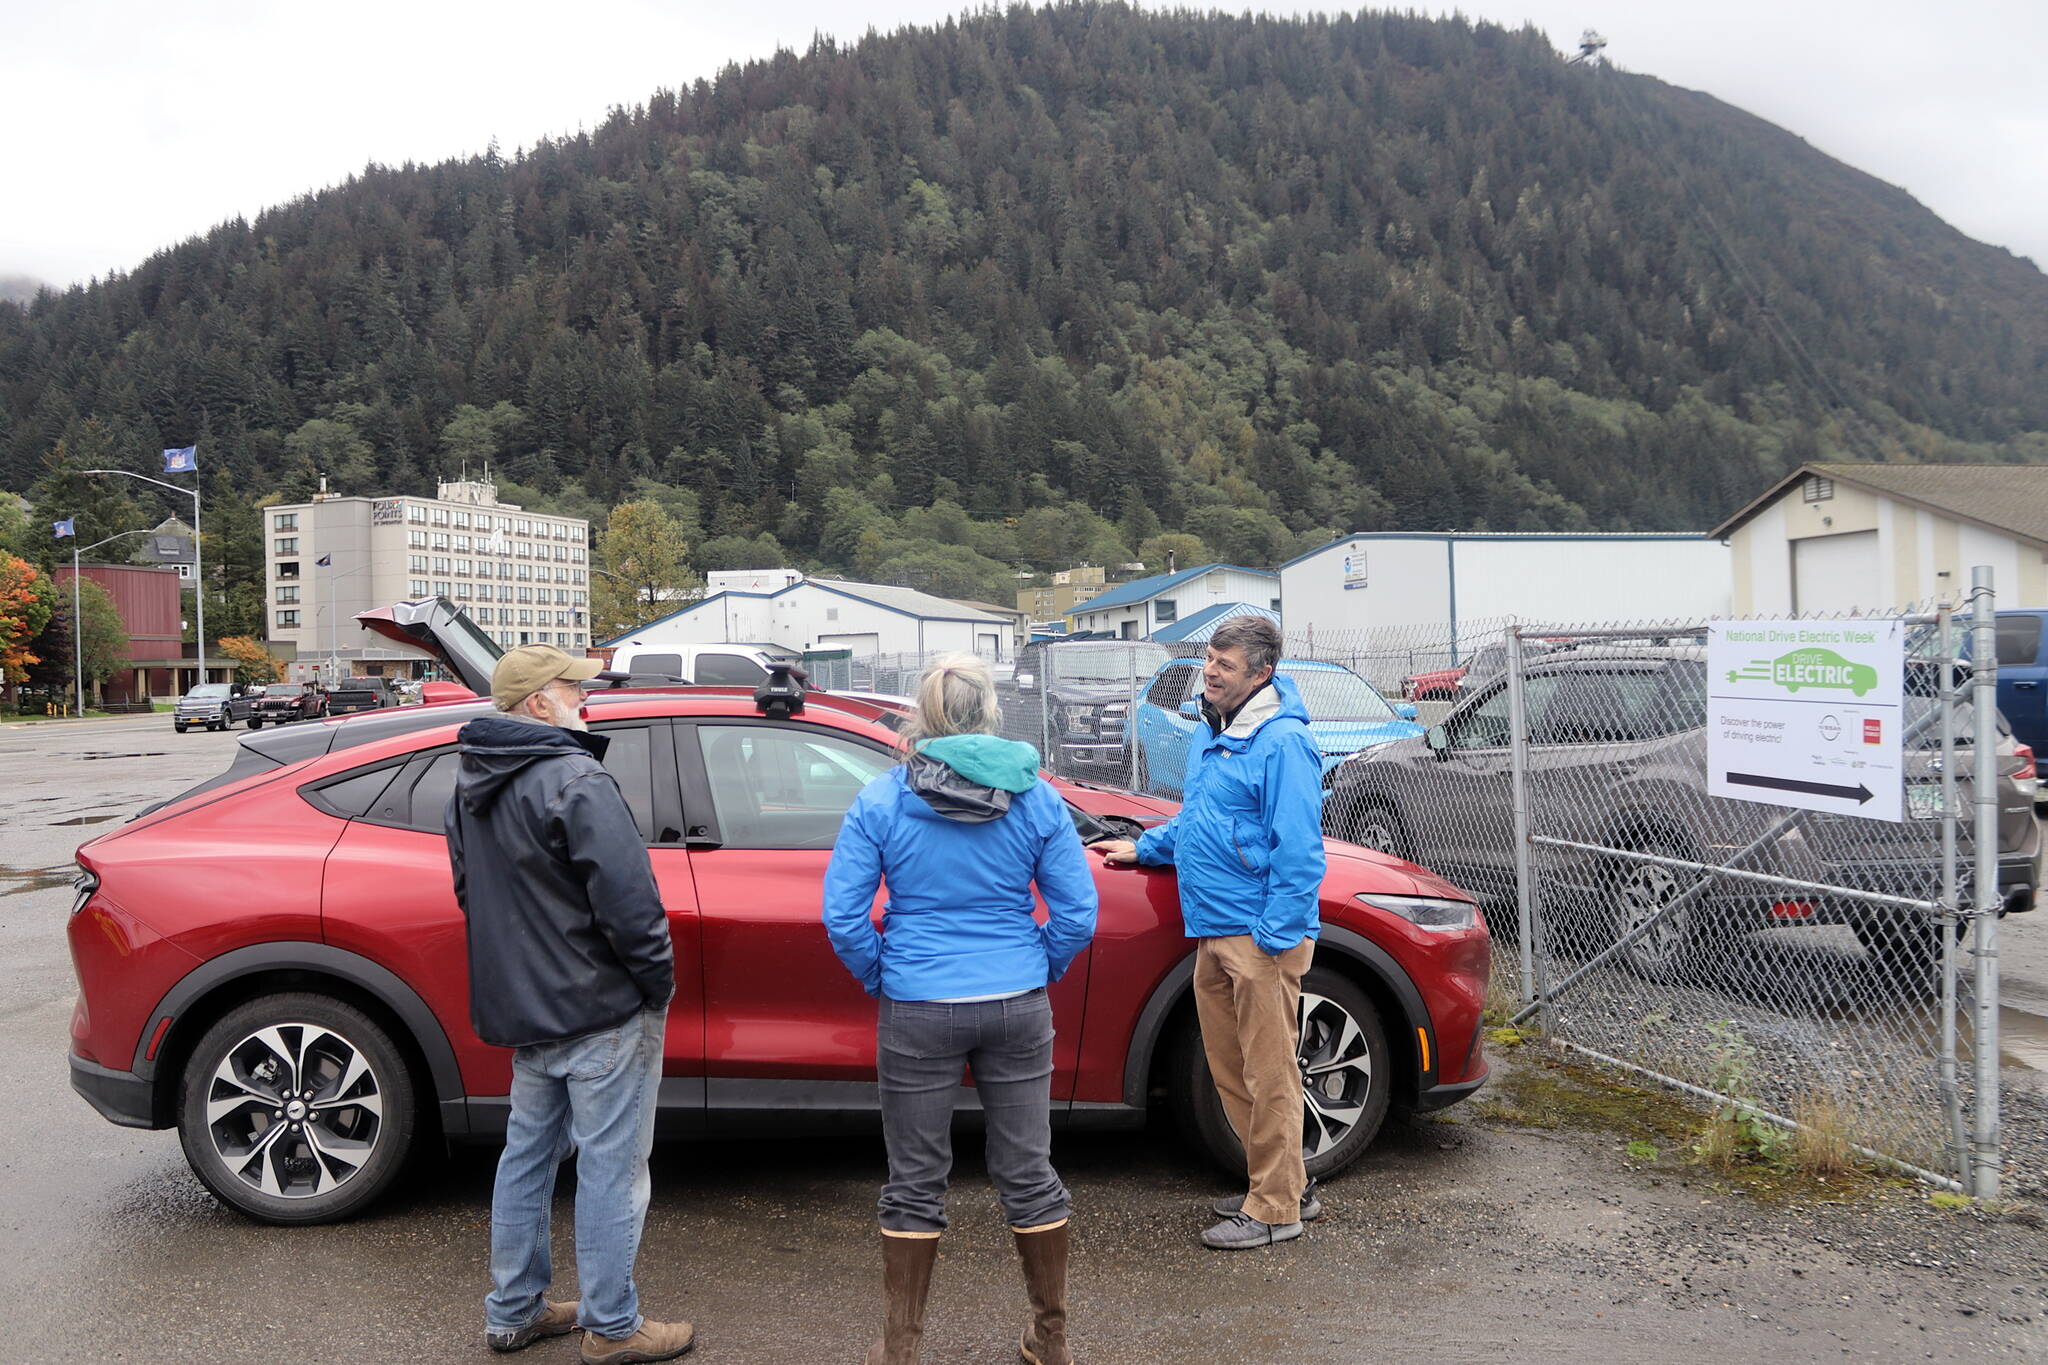 Jim Scheufelt, right, explains how his newly purchased Ford Mustang Mach-E operates to a couple of visitors at the ninth annual Juneau EV & EBIKE Roundup on Saturday. He said he has always driven Fords because his father worked for the company, but decided this year to make the switch from gas to electric. He said his wife drives a similar model and their son an electric Ford Focus, making them “an all-EV household.” (Mark Sabbatini / Juneau Empire)